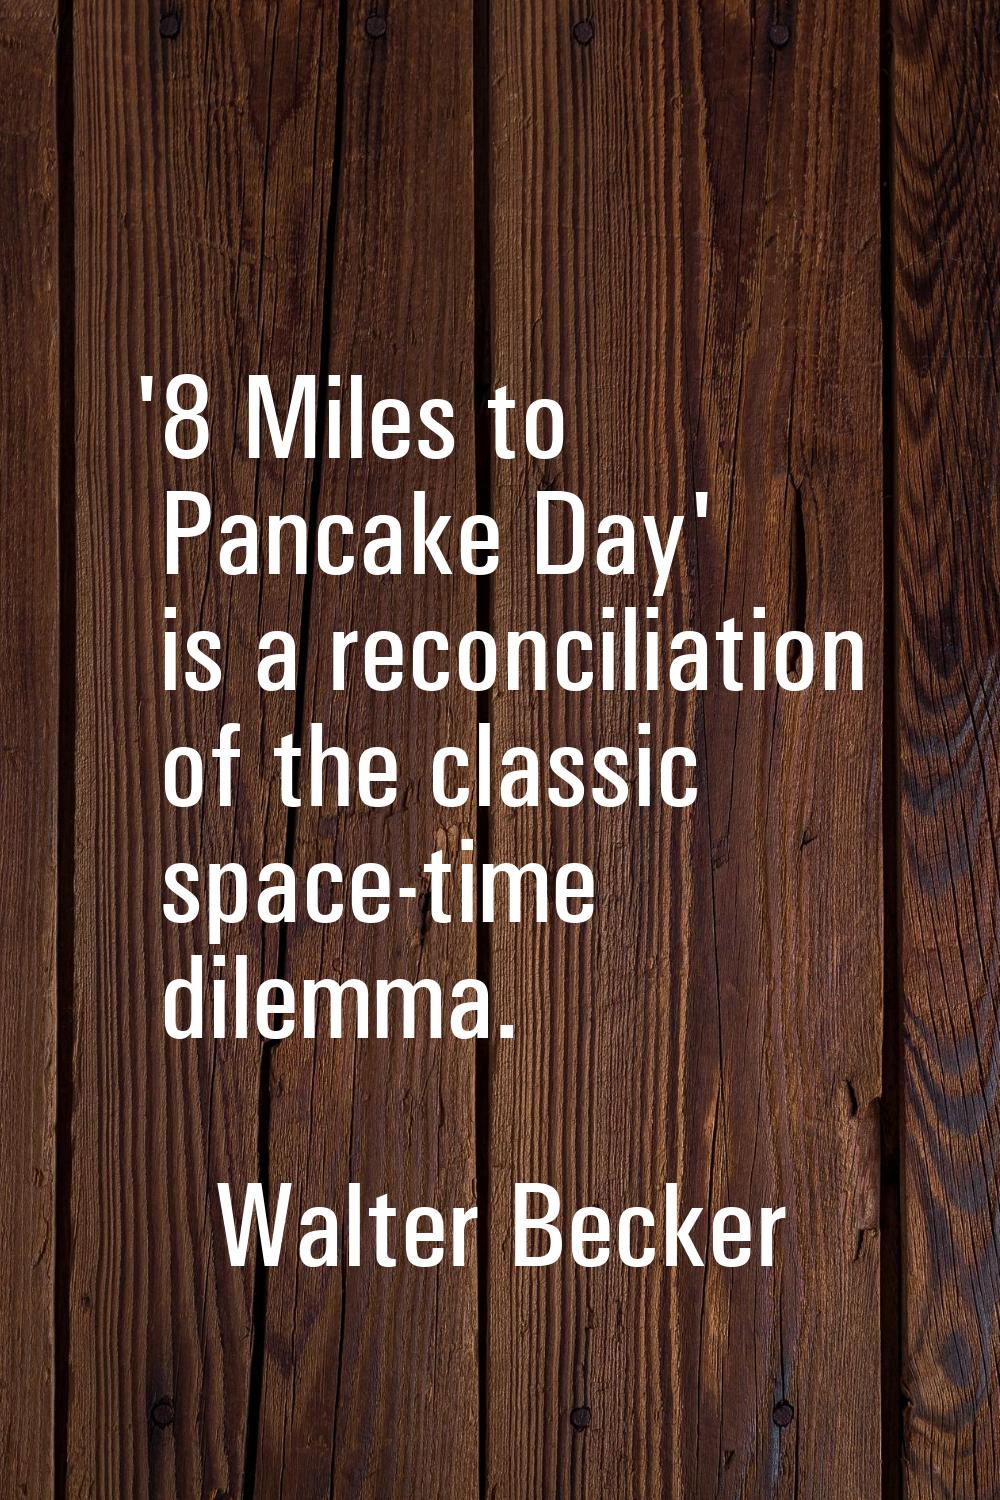 '8 Miles to Pancake Day' is a reconciliation of the classic space-time dilemma.